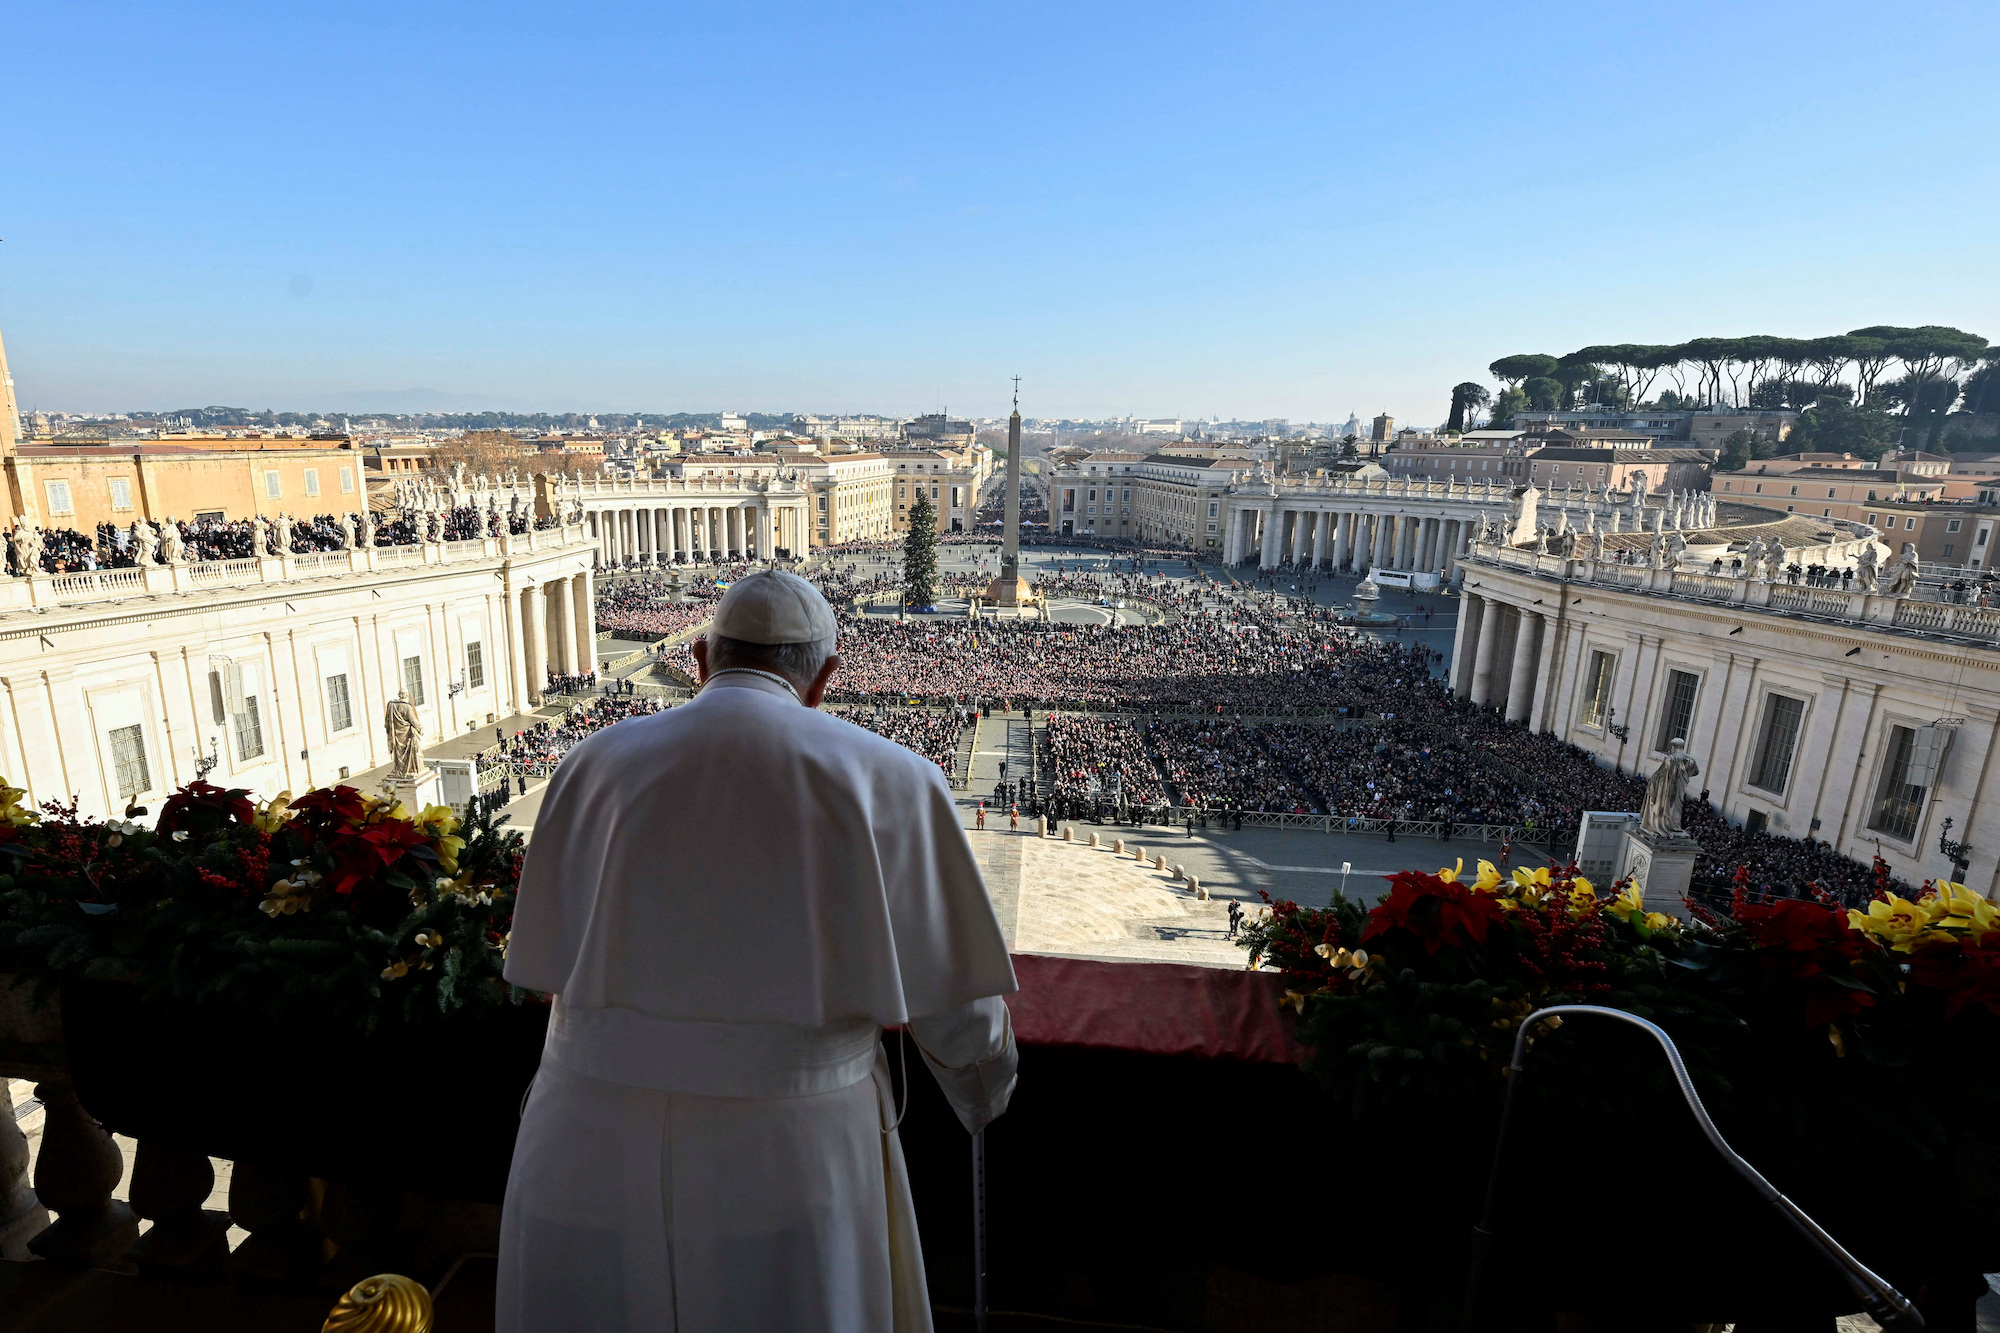 Pope Francis delivers his annual Christmas Day message from the main balcony of St. Peter's Basilica at the Vatican on December 25.